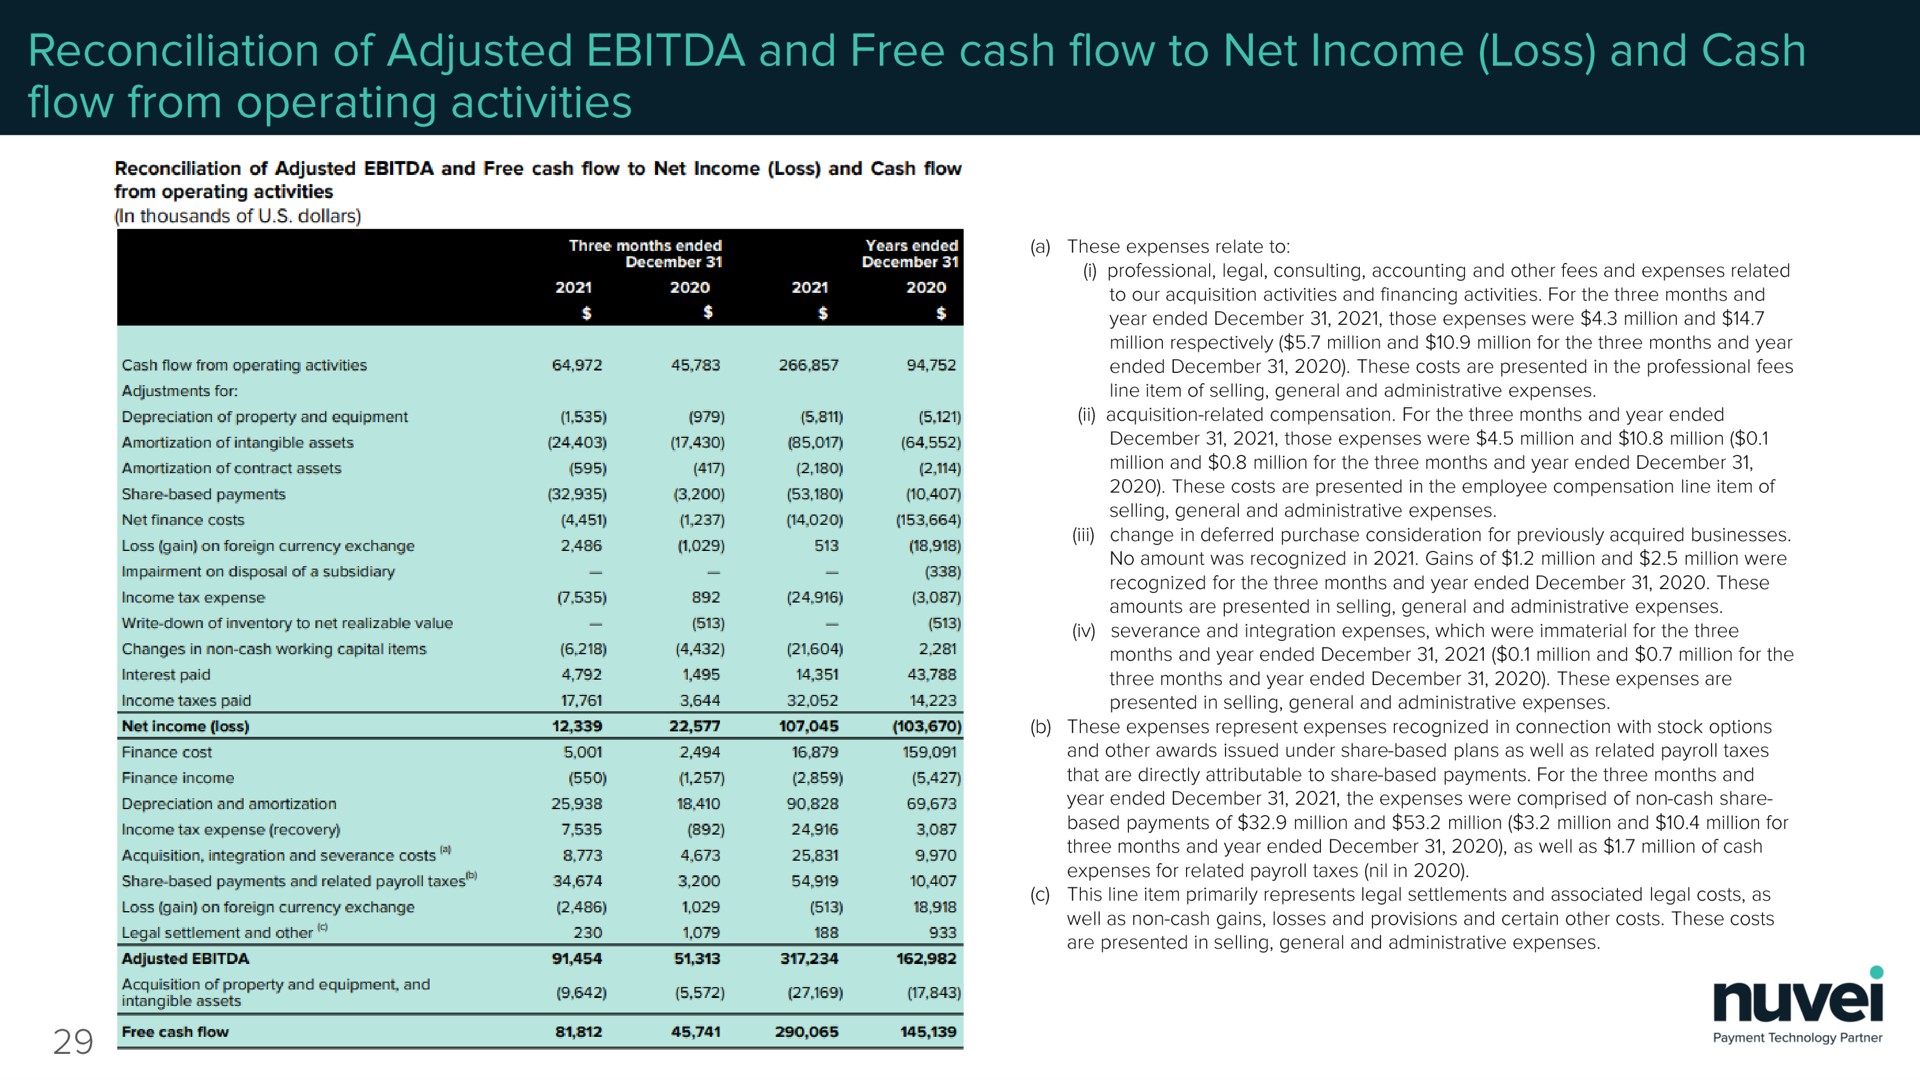 reconciliation of adjusted and free cash flow to net income loss and cash flow from operating activities | Nuvei